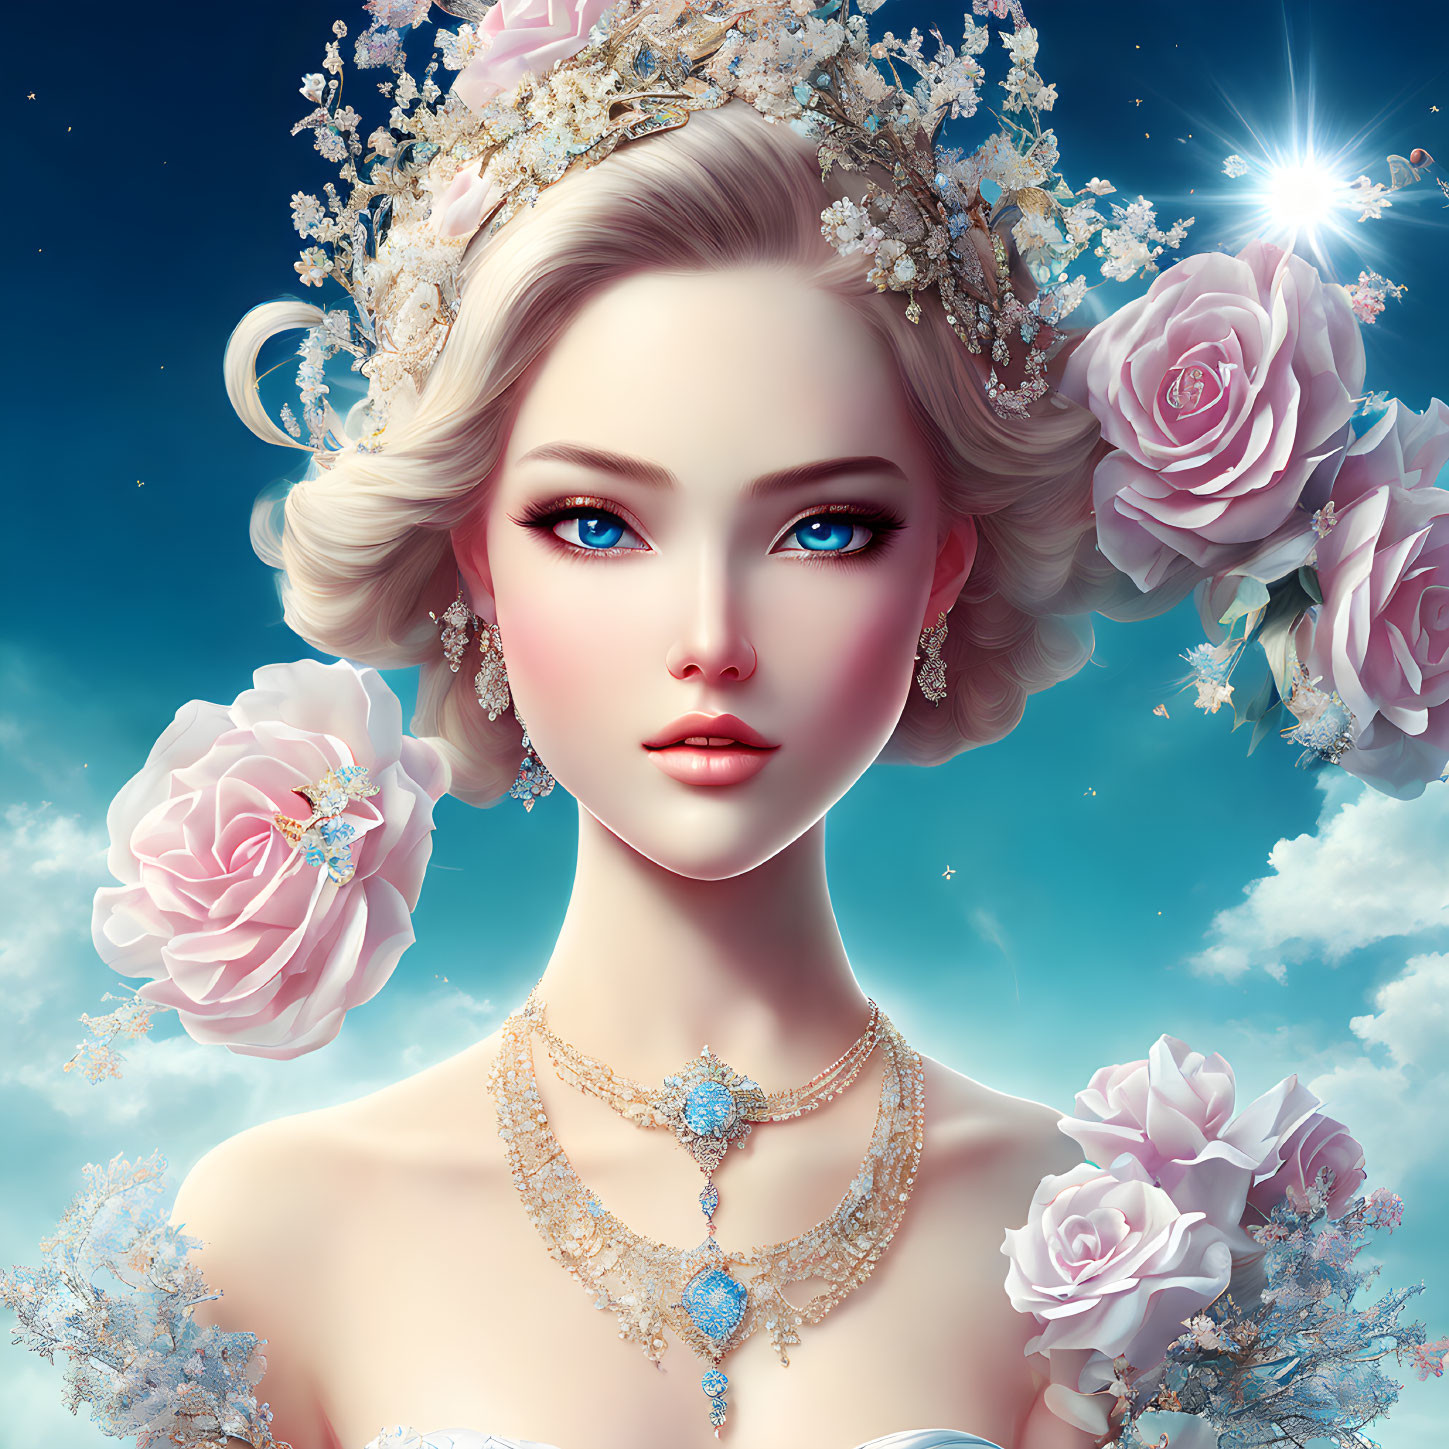 Digital Art Portrait of Woman with Floral Crown and Jewels Among Pink Roses